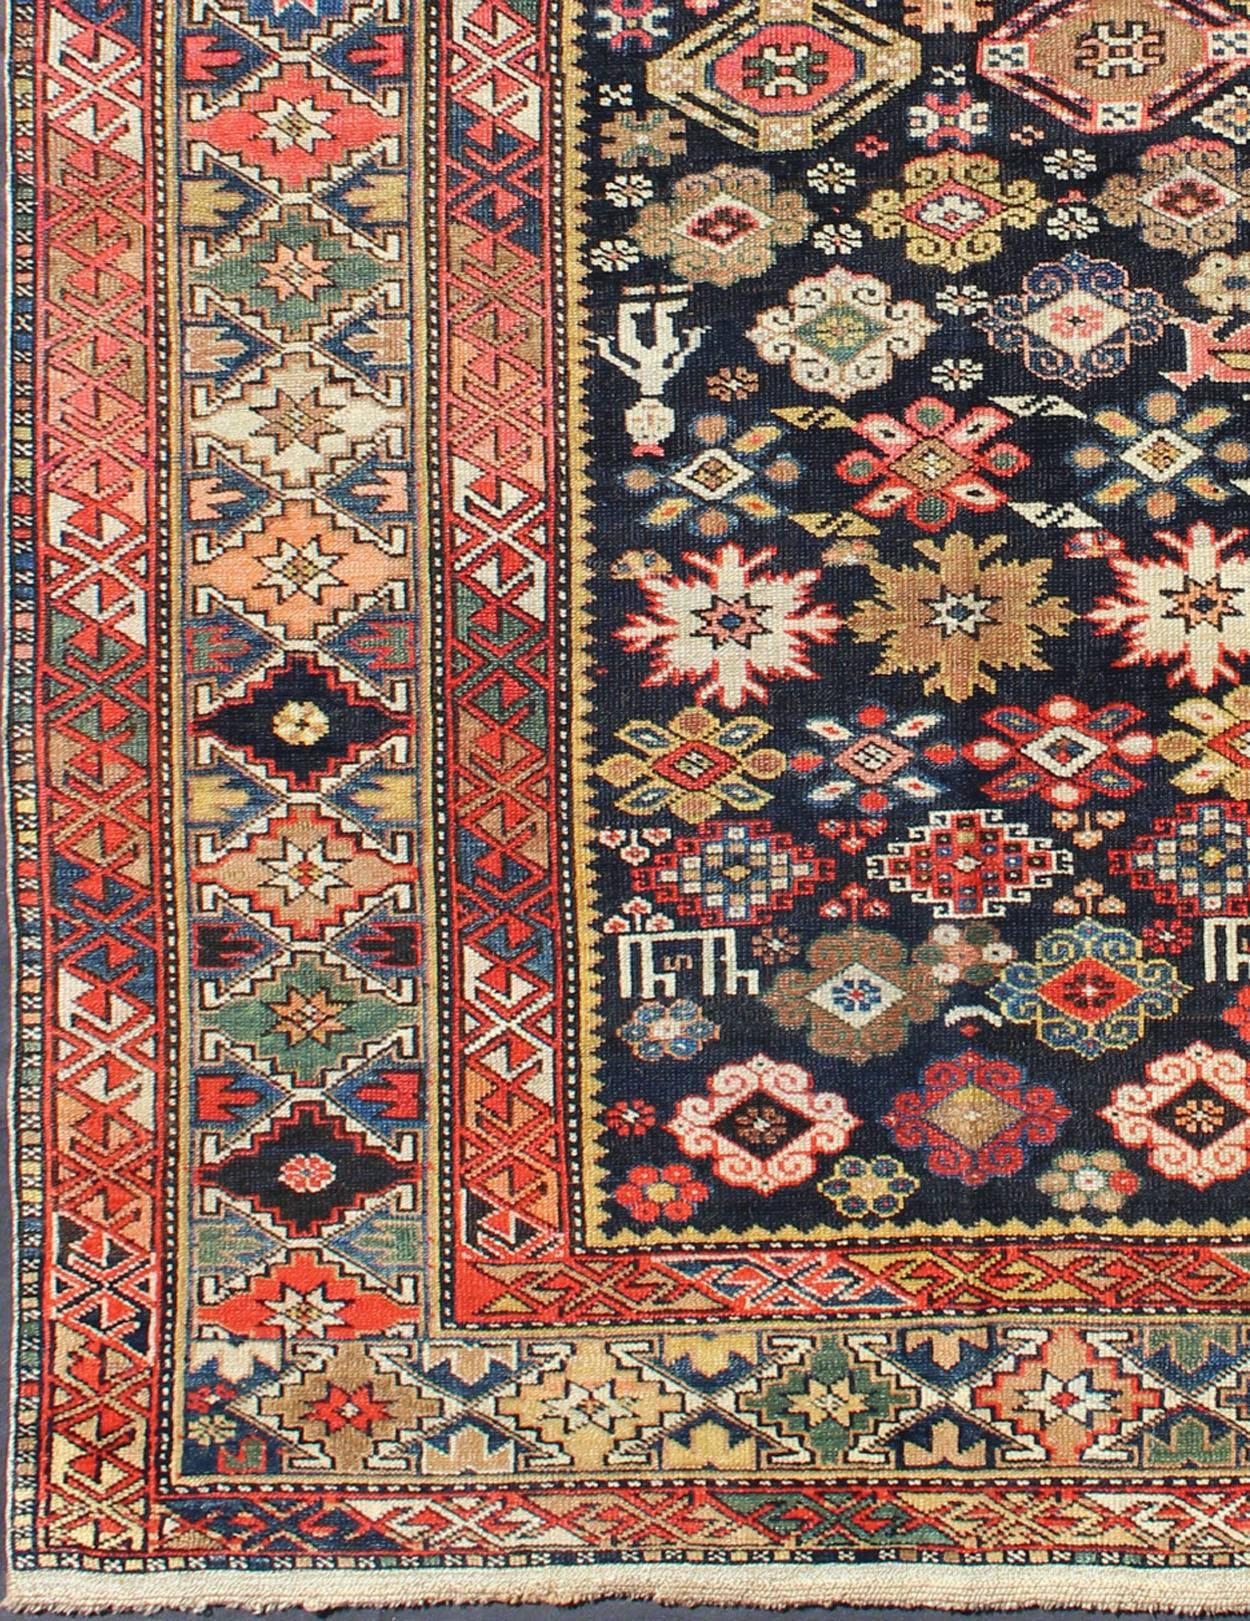 This Kuba rug from the southern Caucasus features many diamond medallions in the central field surrounded by multiple borders of geometric design. The diagonal coloring and arrangement of the field ornaments is heightened by the colorful design of